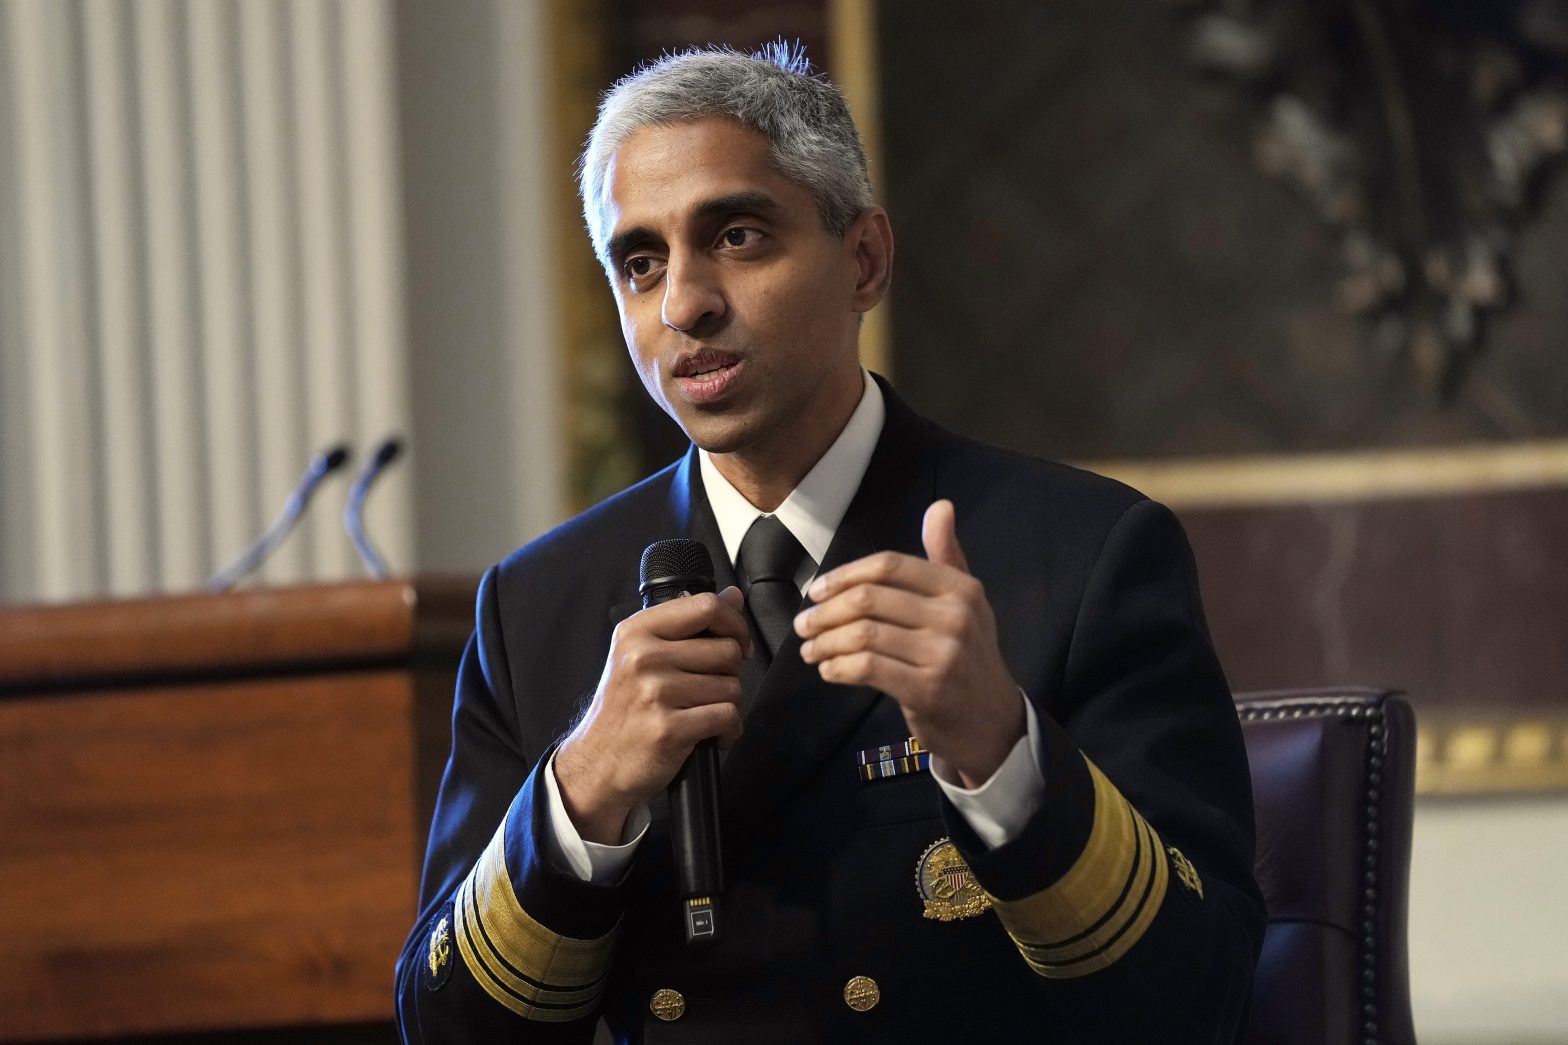 Surgeon General Asks Congress to Require Warning Labels for Social Media, Like Those on Cigarettes